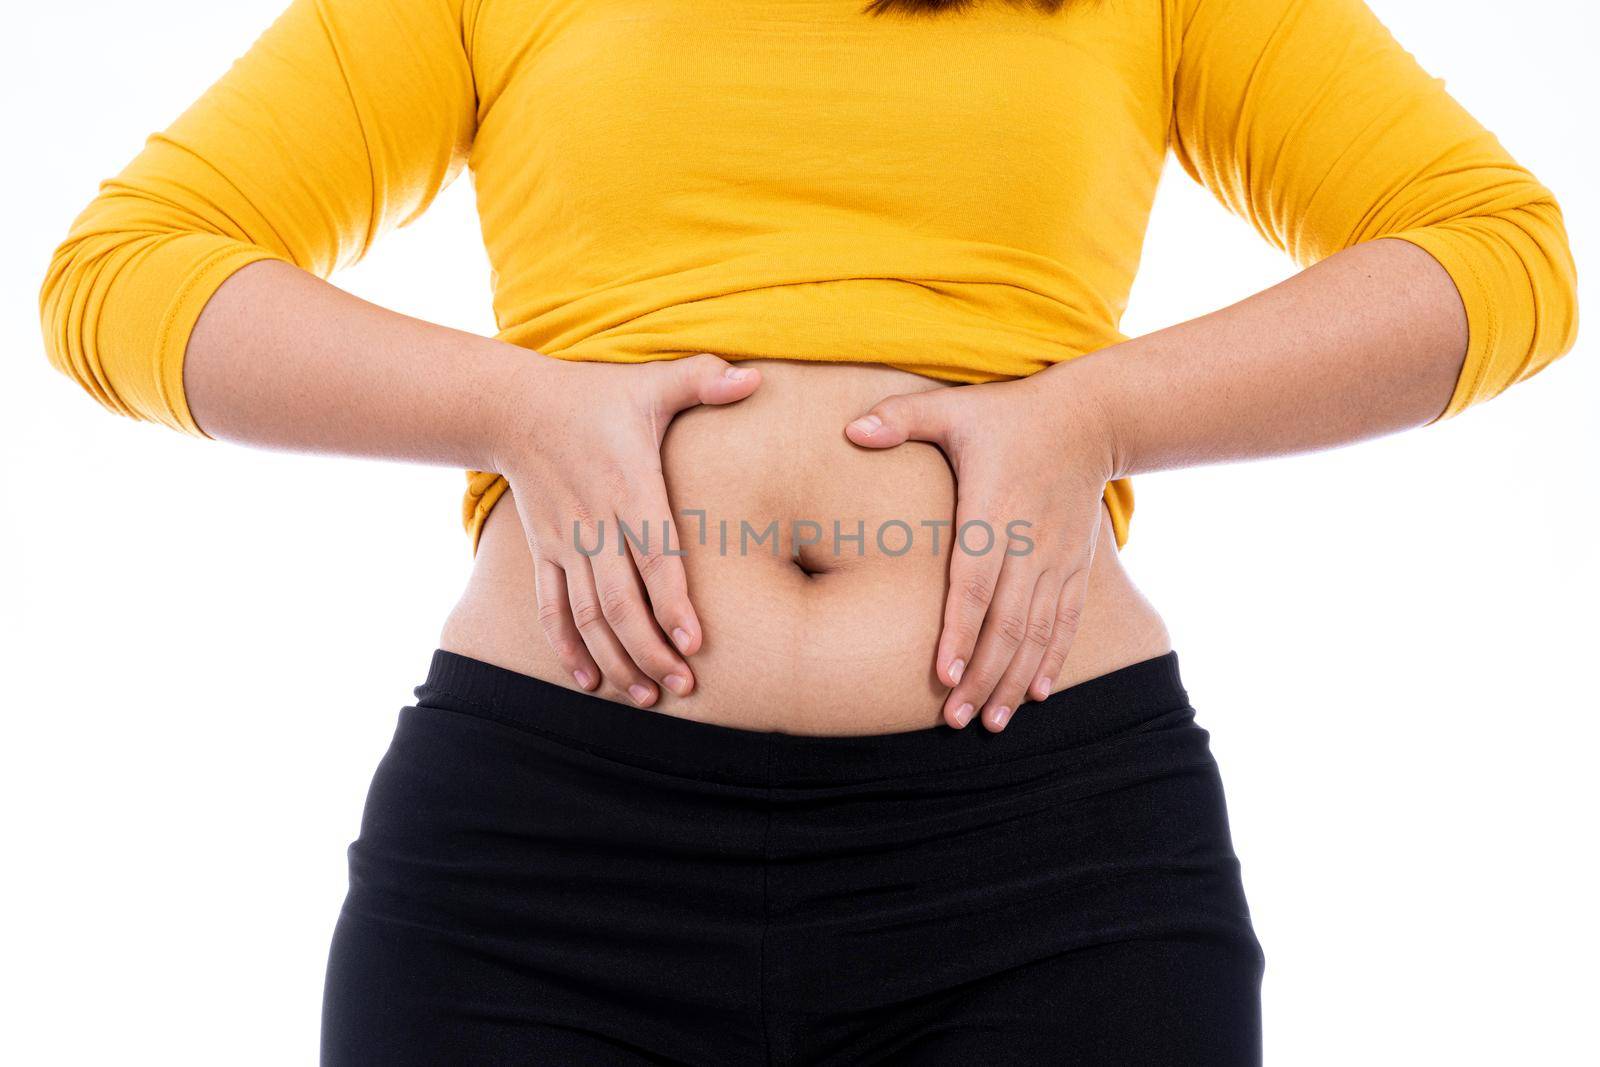 Fat woman holding excessive fat belly, overweight fatty belly isolated white background. Diet lifestyle, weight loss, stomach muscle, healthy concept. by mikesaran